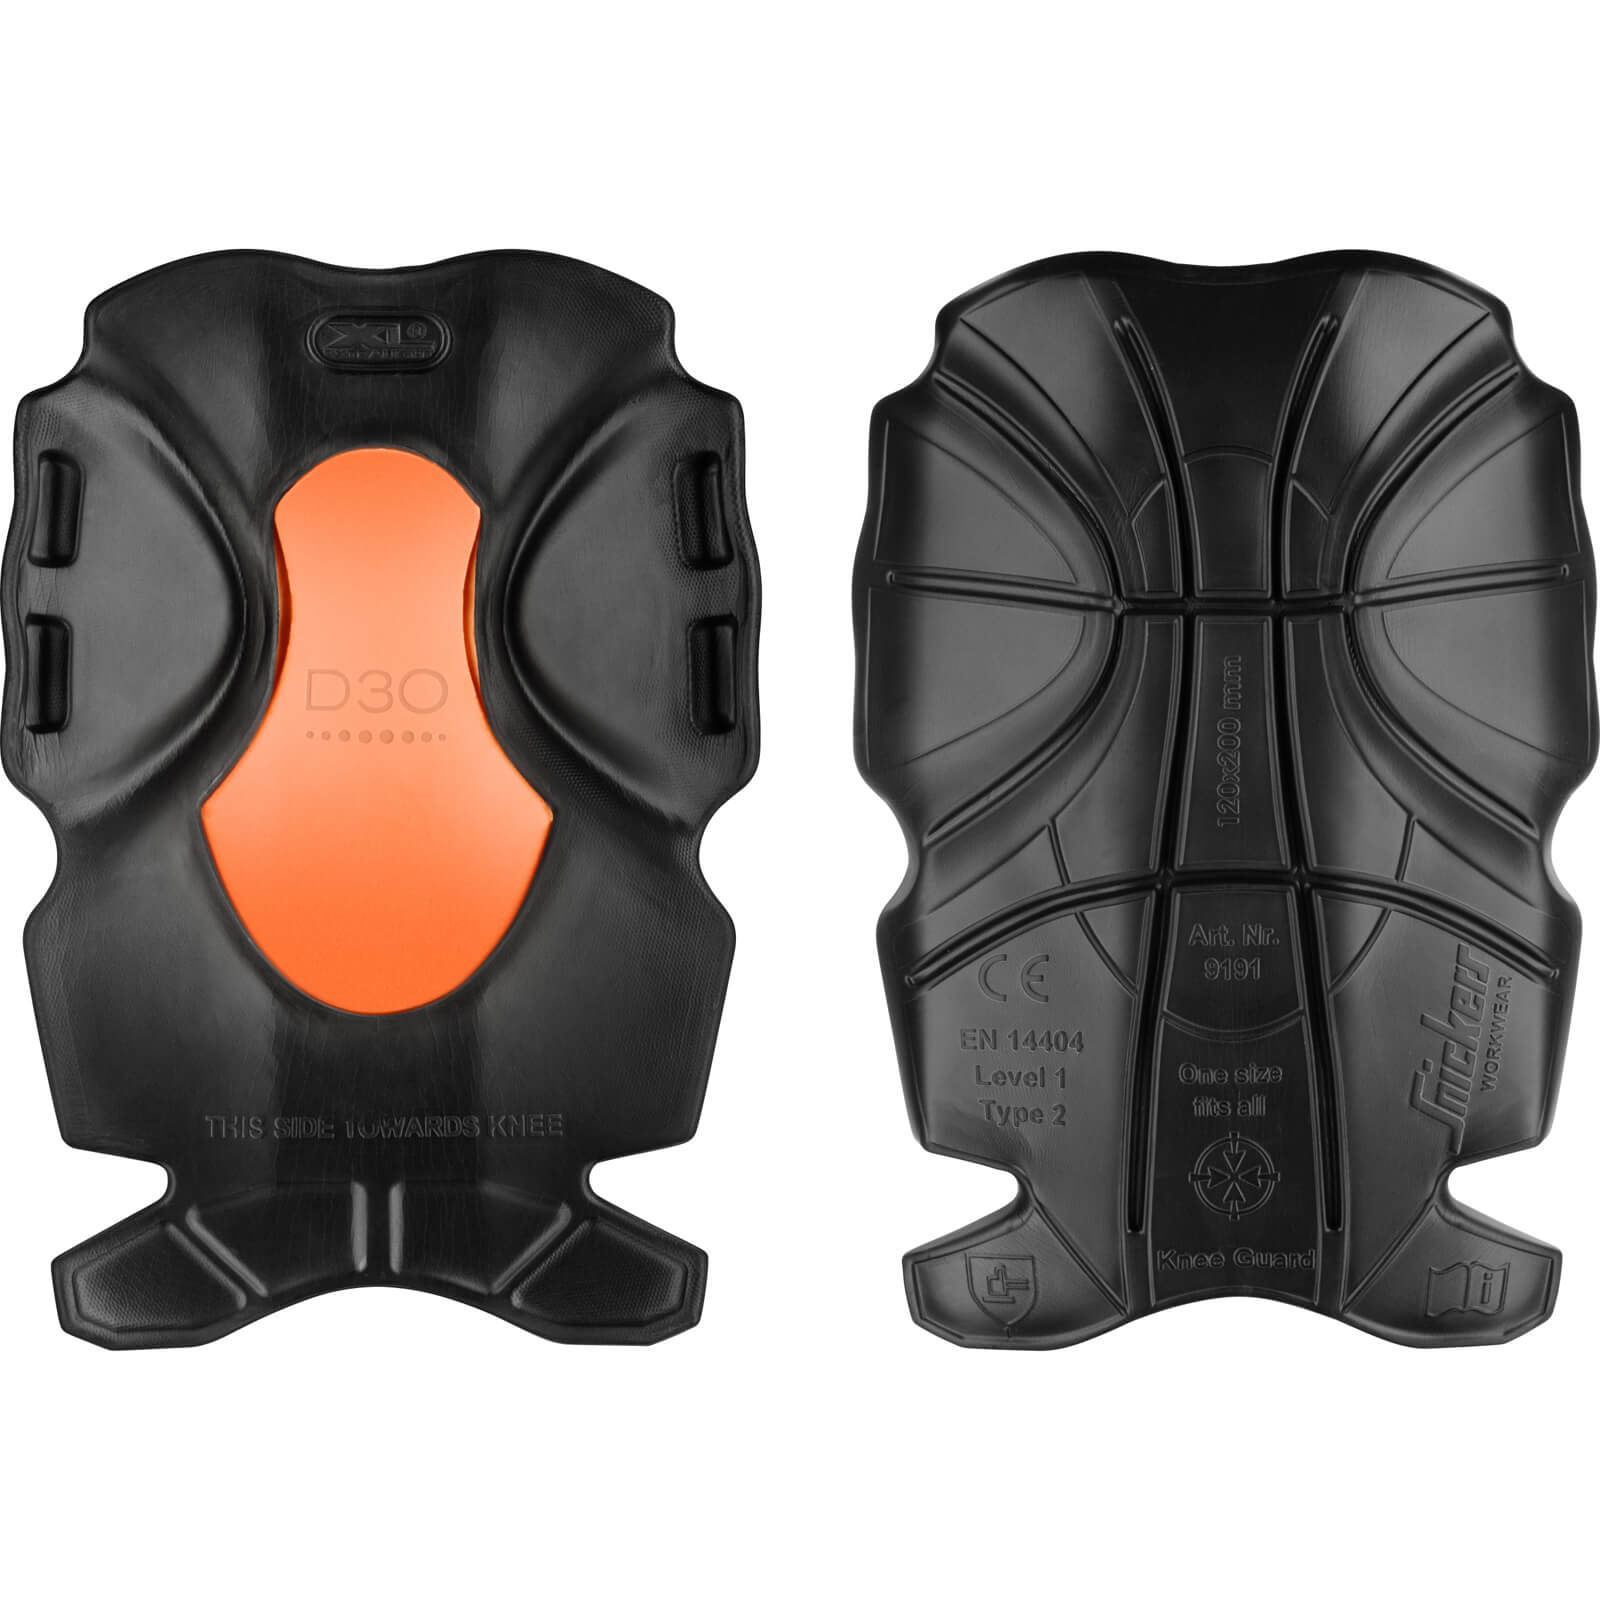 Image of Snickers 9191 XTR D30 Craftsmens Knee Pad